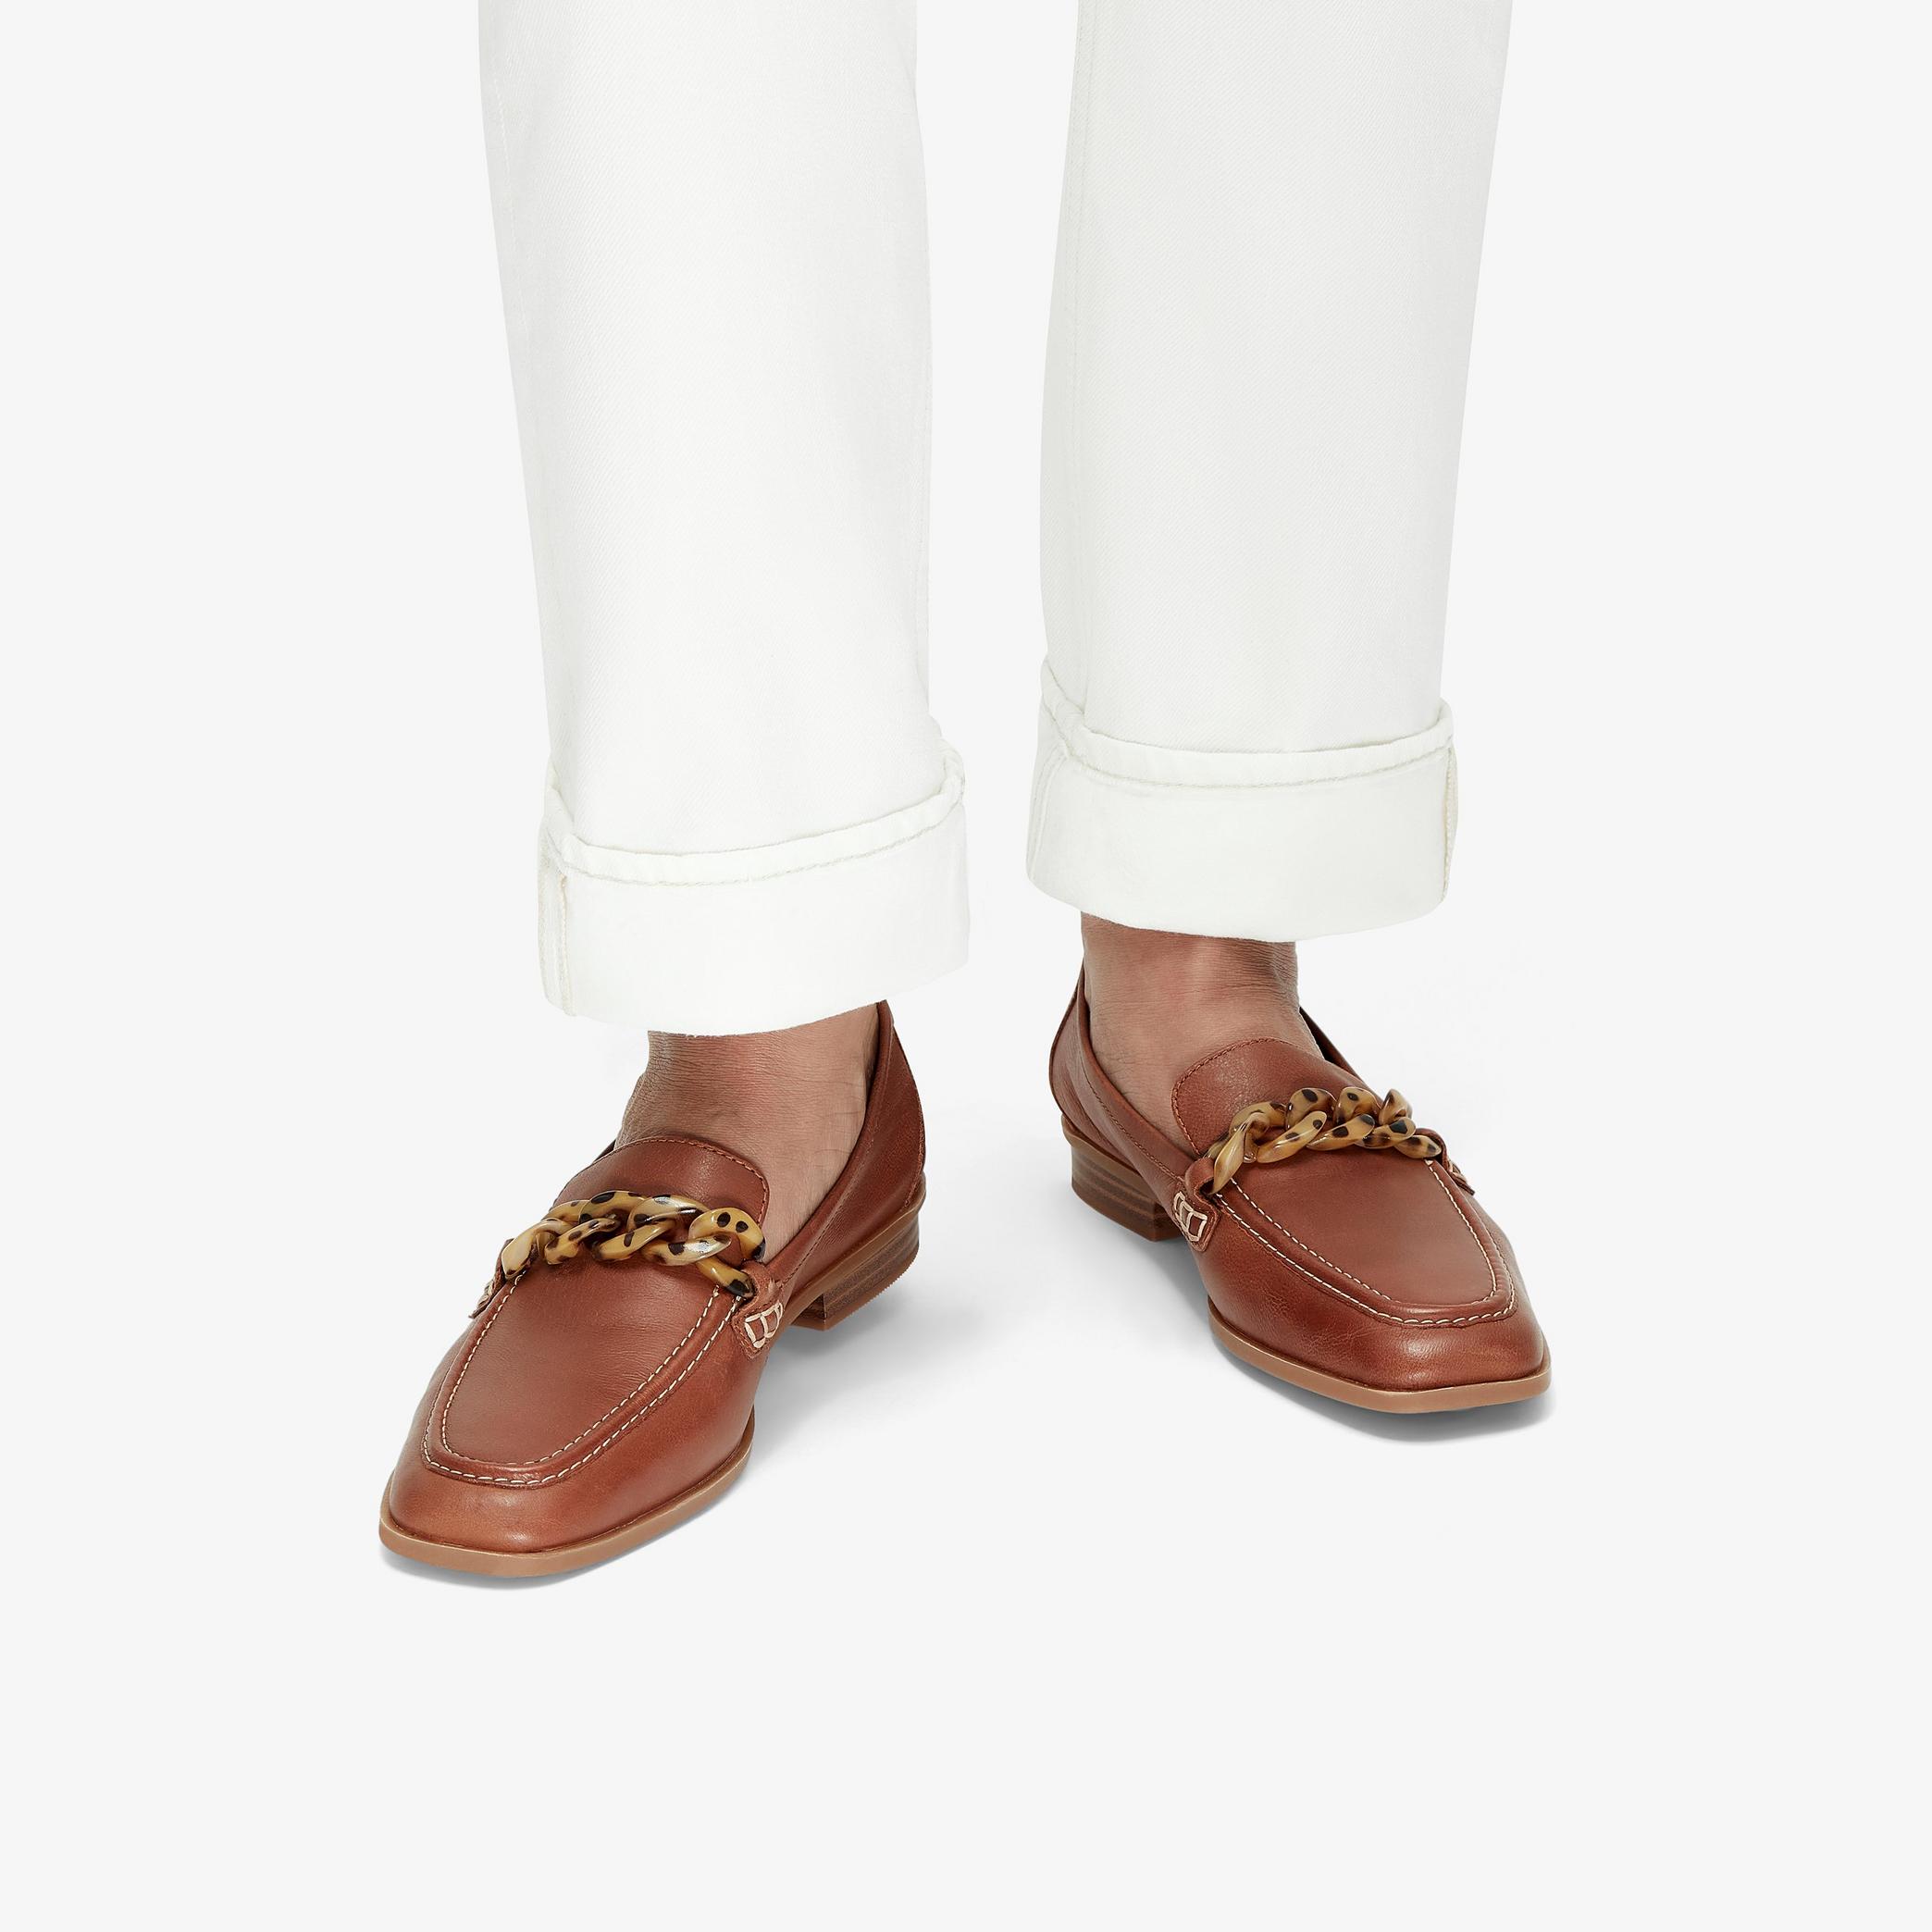 Sarafyna Iris Tan Leather Loafers, view 10 of 11